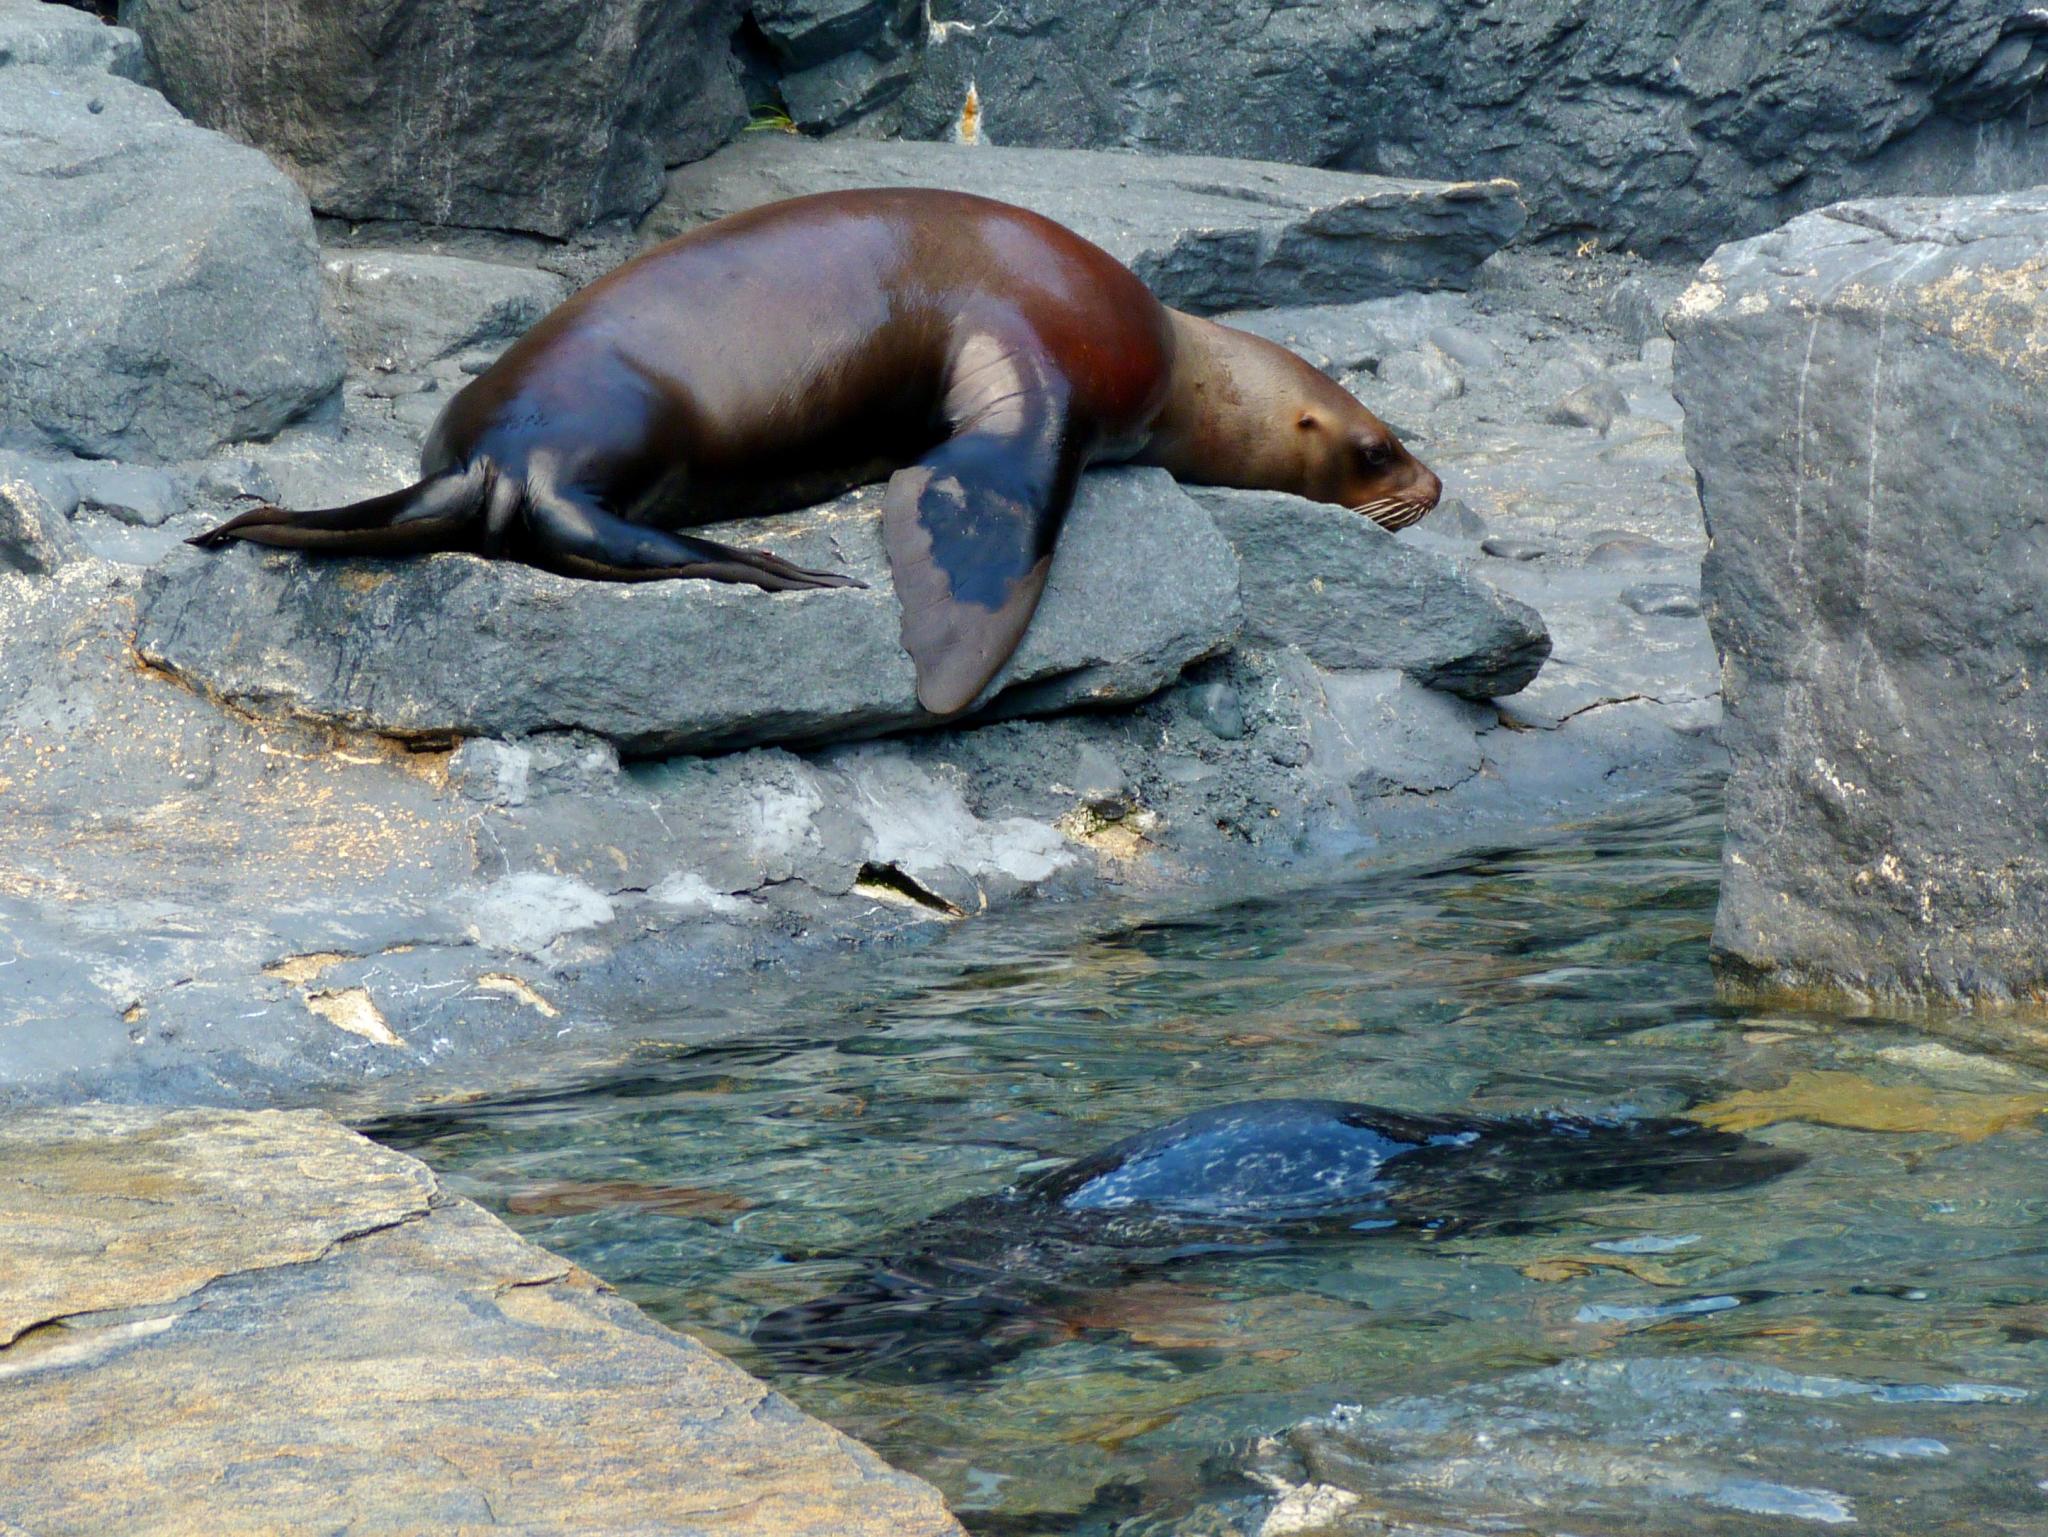 a seal is sitting on a rock near a pool of water